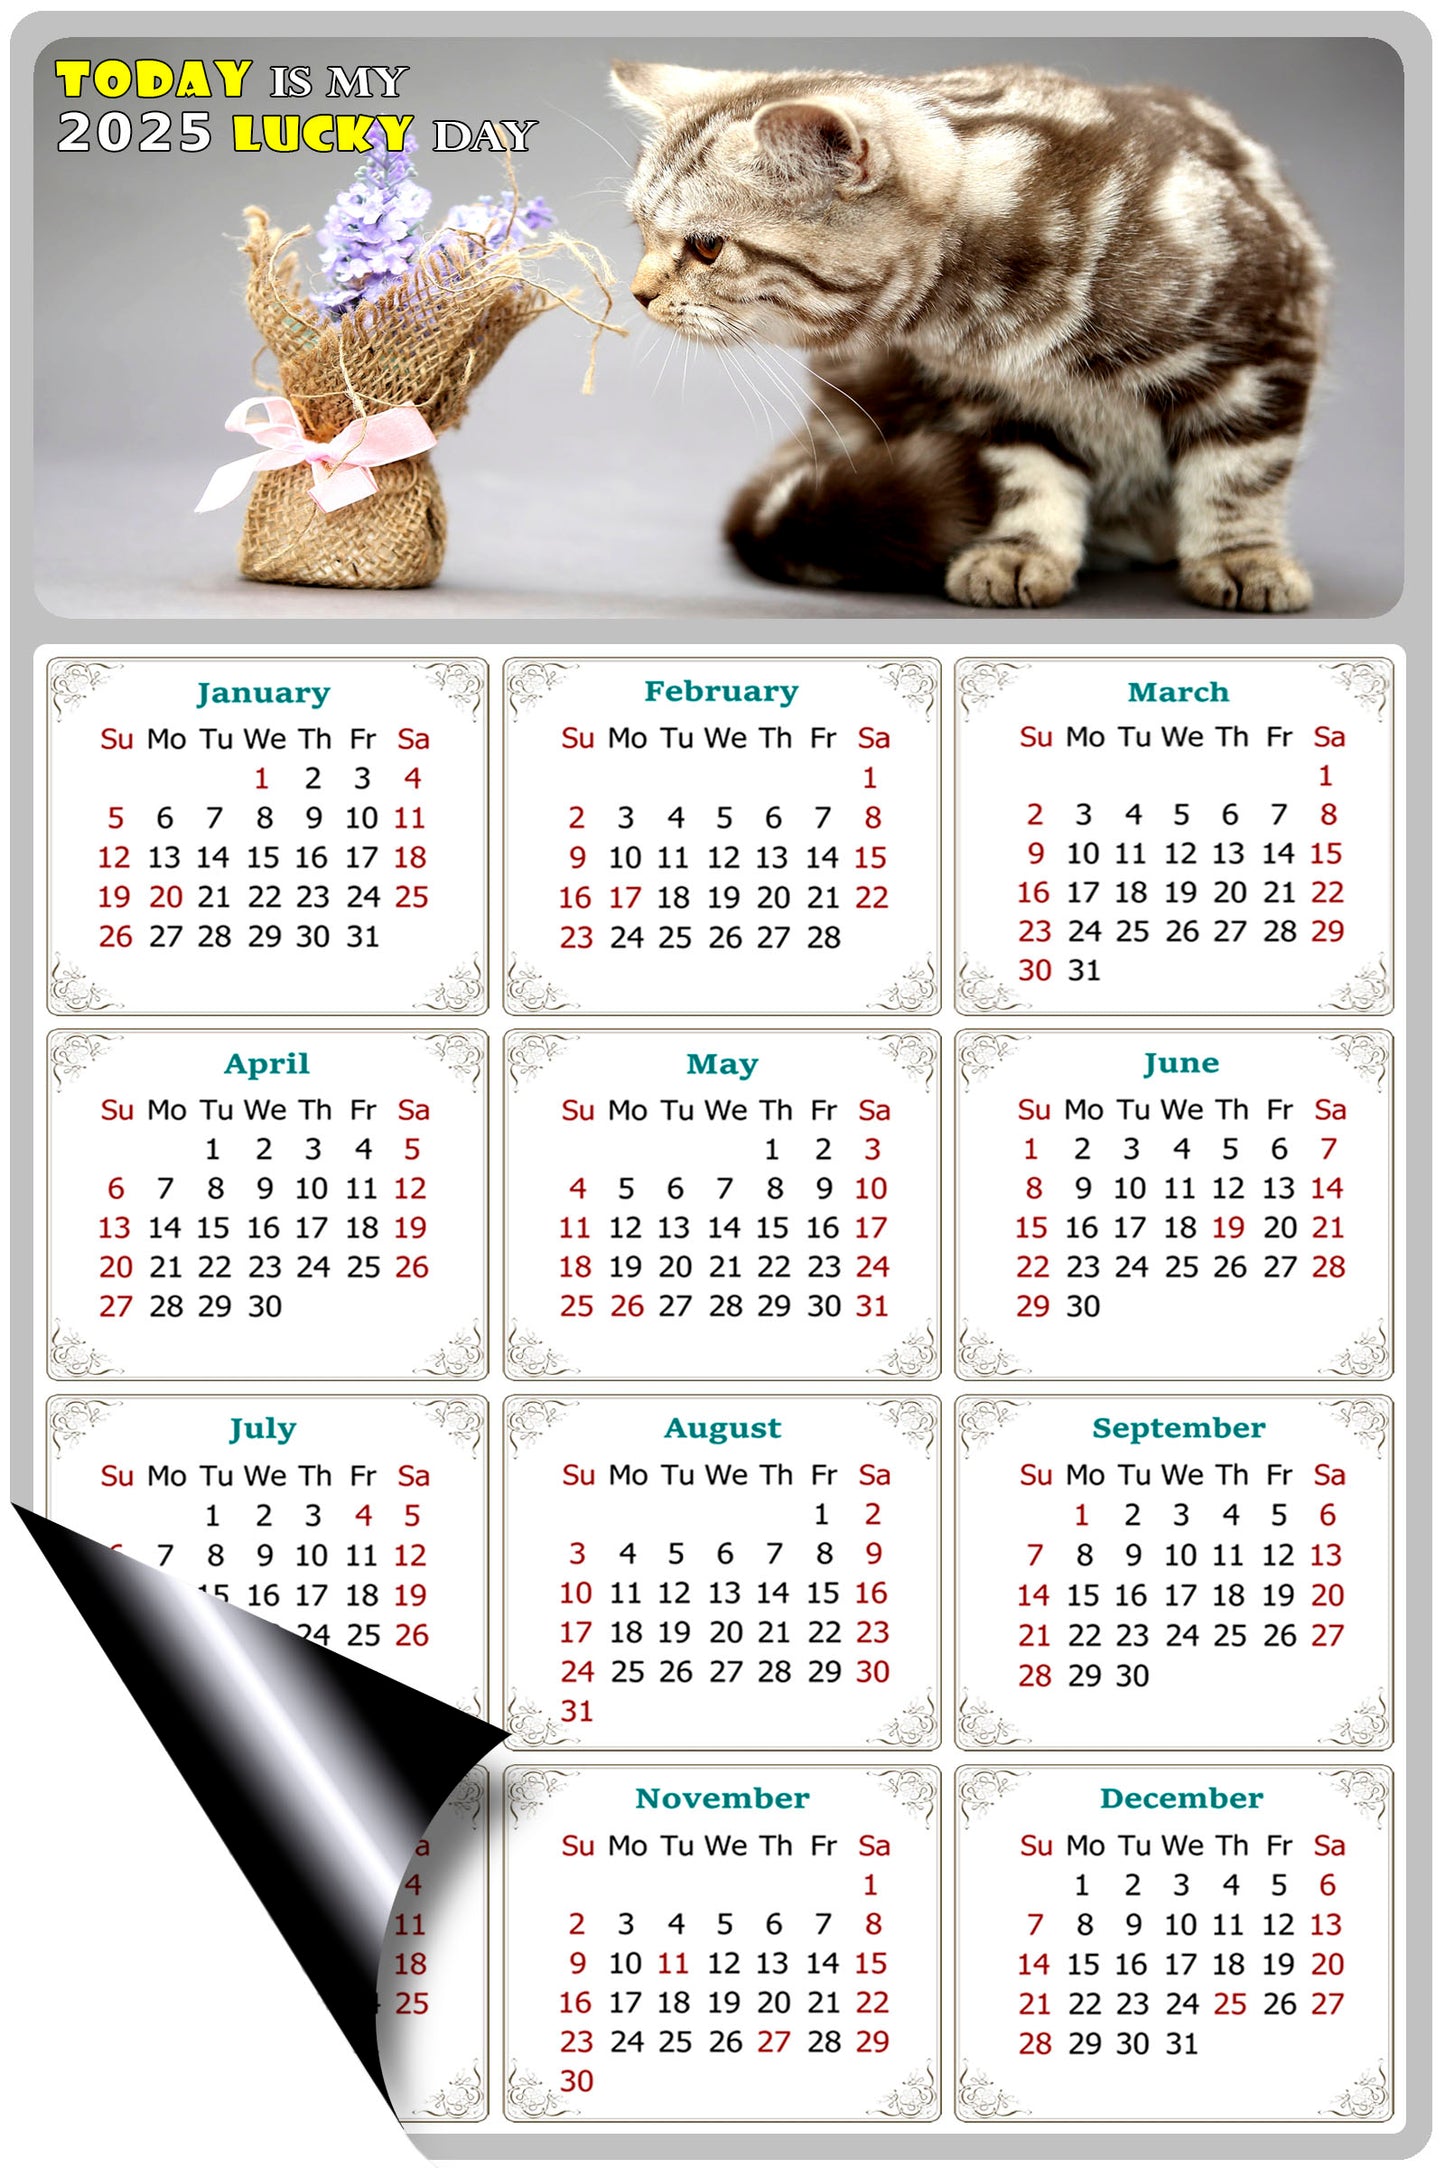 2025 Magnetic Calendar - Today is My Lucky Day (Fade, Tear, and Water Resistant)- Cat Themed 025